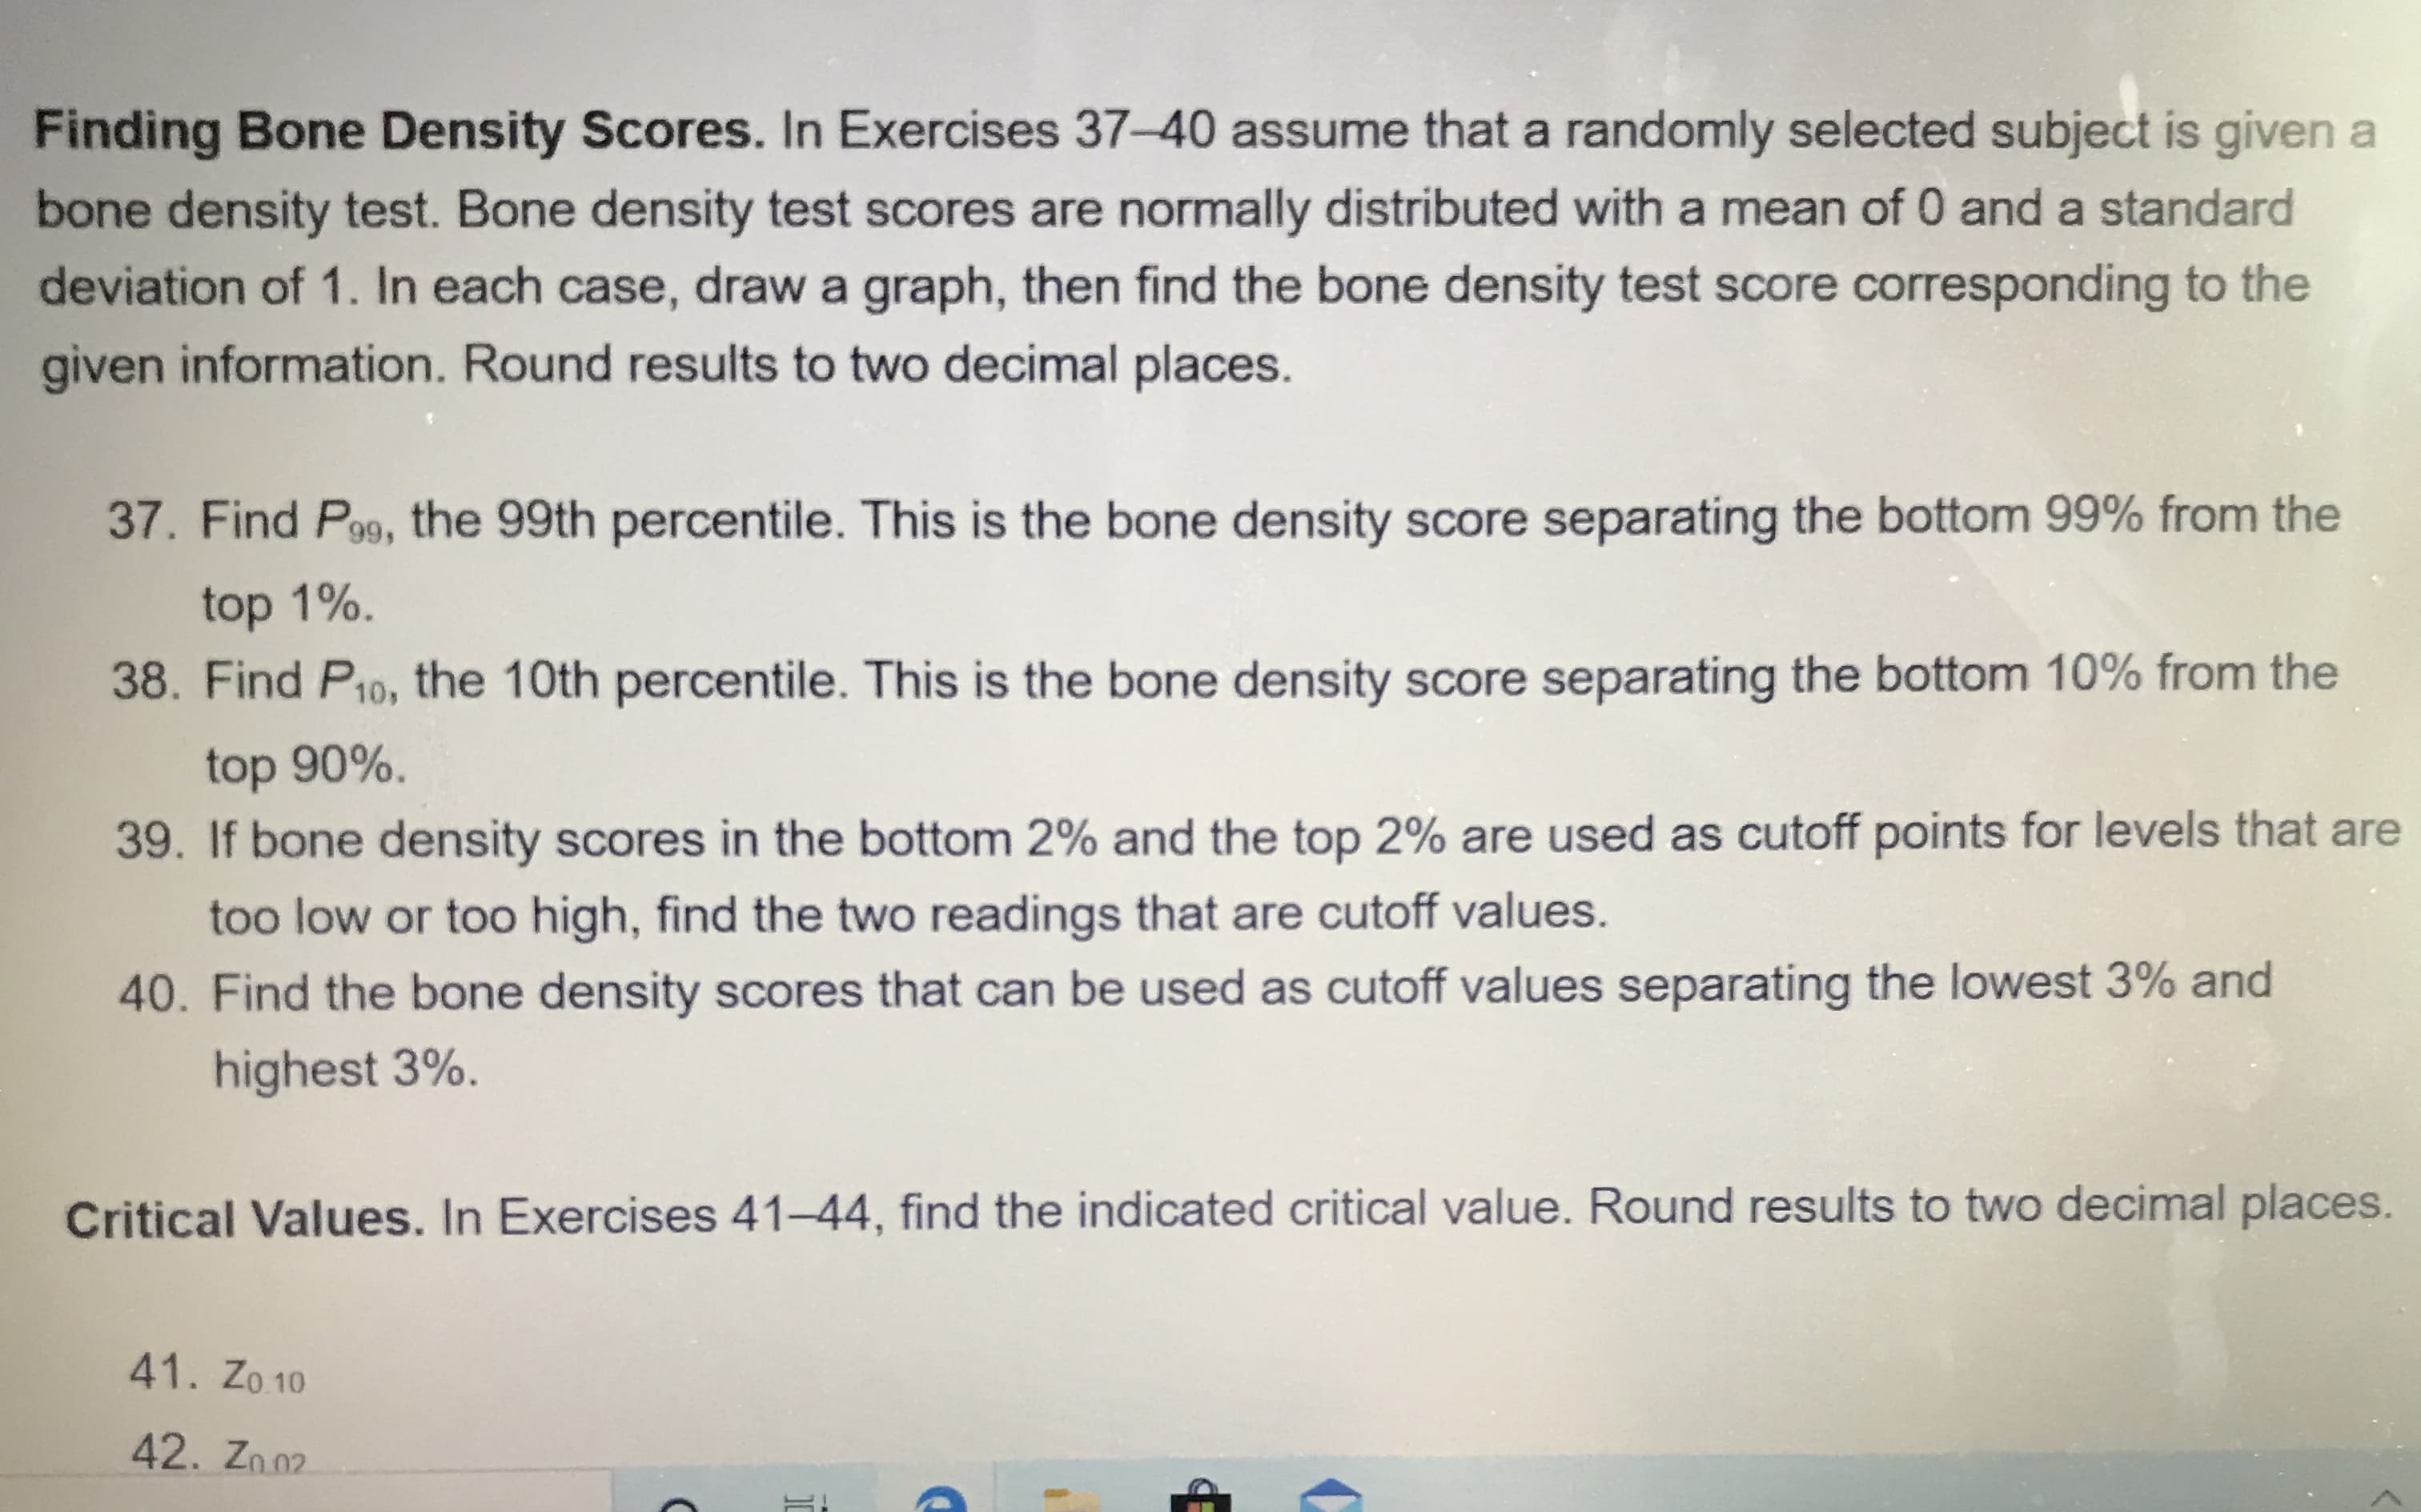 Finding Bone Density Scores. In Exercises 37-40 assume that a randomly selected subject is given
bone density test. Bone density test scores are normally distributed with a mean of 0 and a standard
deviation of 1. In each case, draw a graph, then find the bone density test score corresponding to the
given information. Round results to two decimal places.
37. Find Po9, the 99th percentile. This is the bone density score separating the bottom 99% from the
top 1%.
38. Find P10, the 10th percentile. This is the bone density score separating the bottom 10% from the
top 90%.
